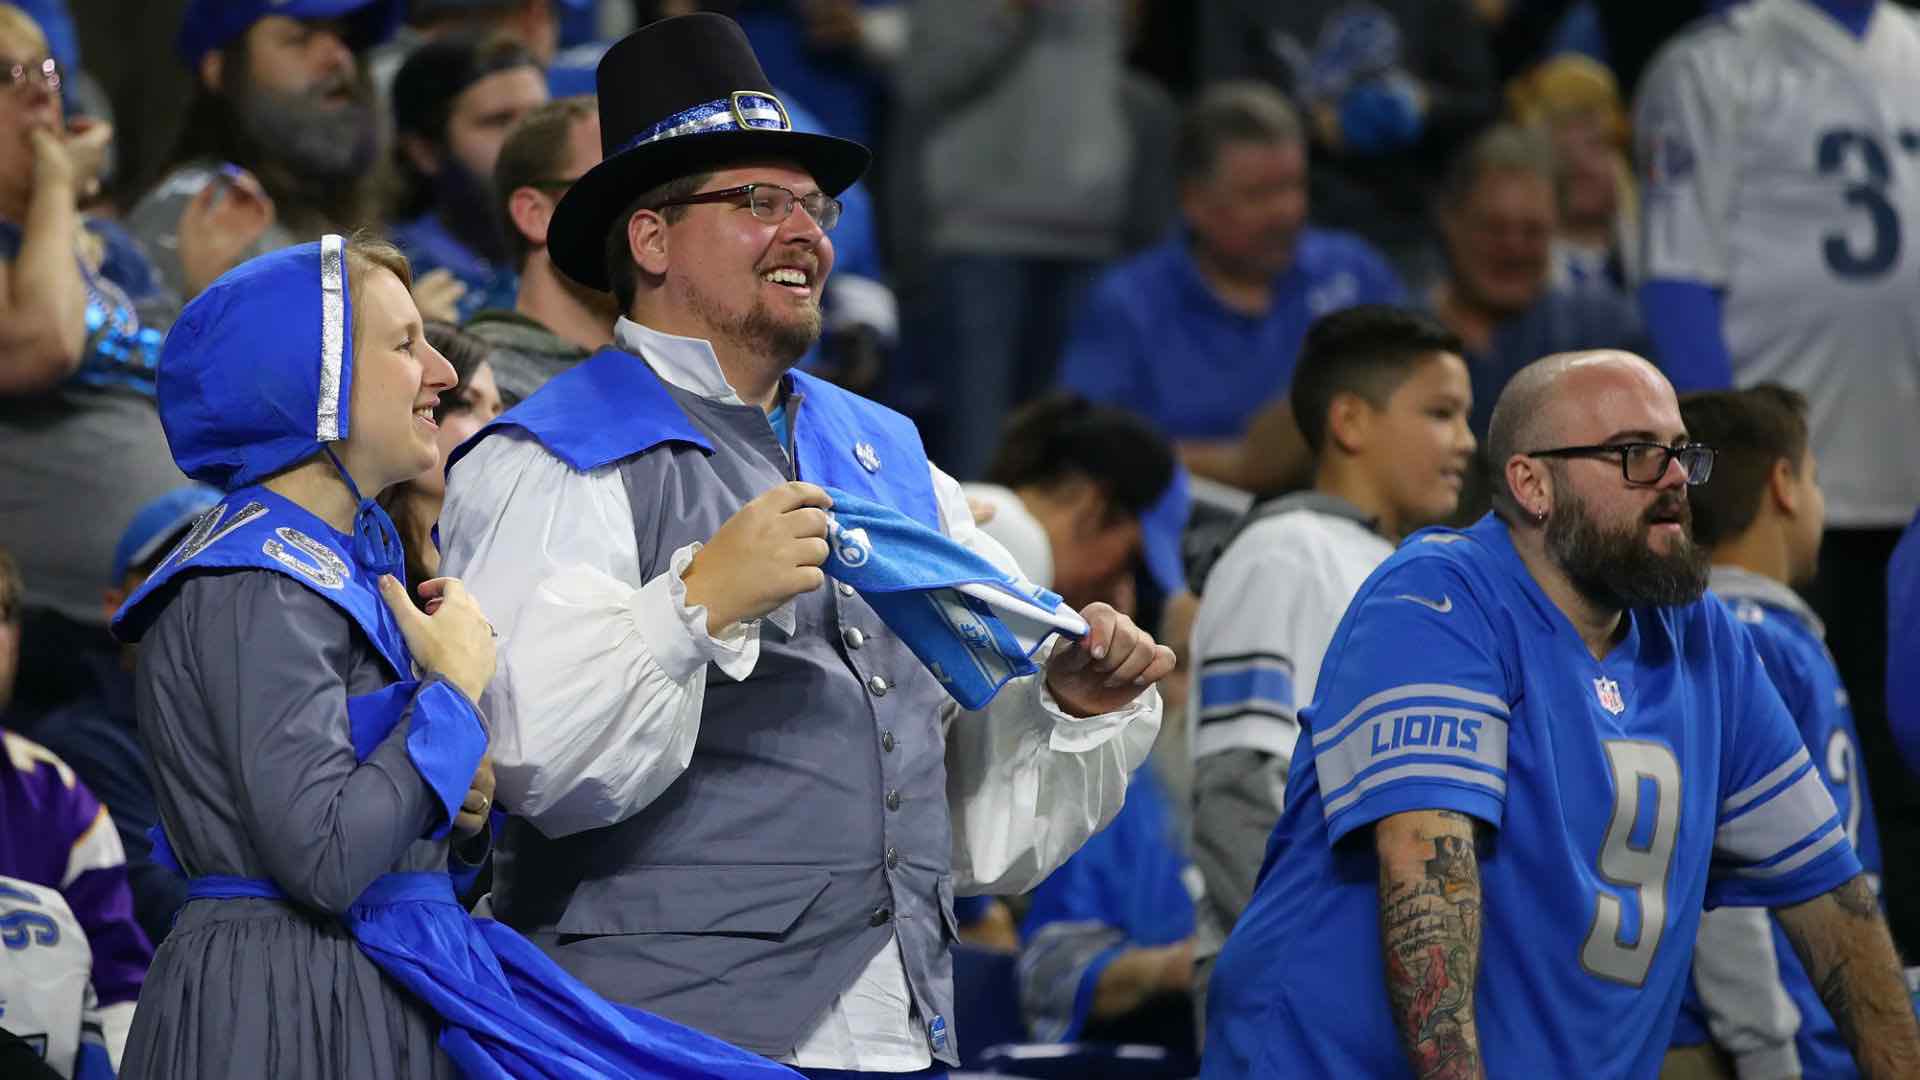 Why do the Detroit Lions always schedule a game on Thanksgiving? Film